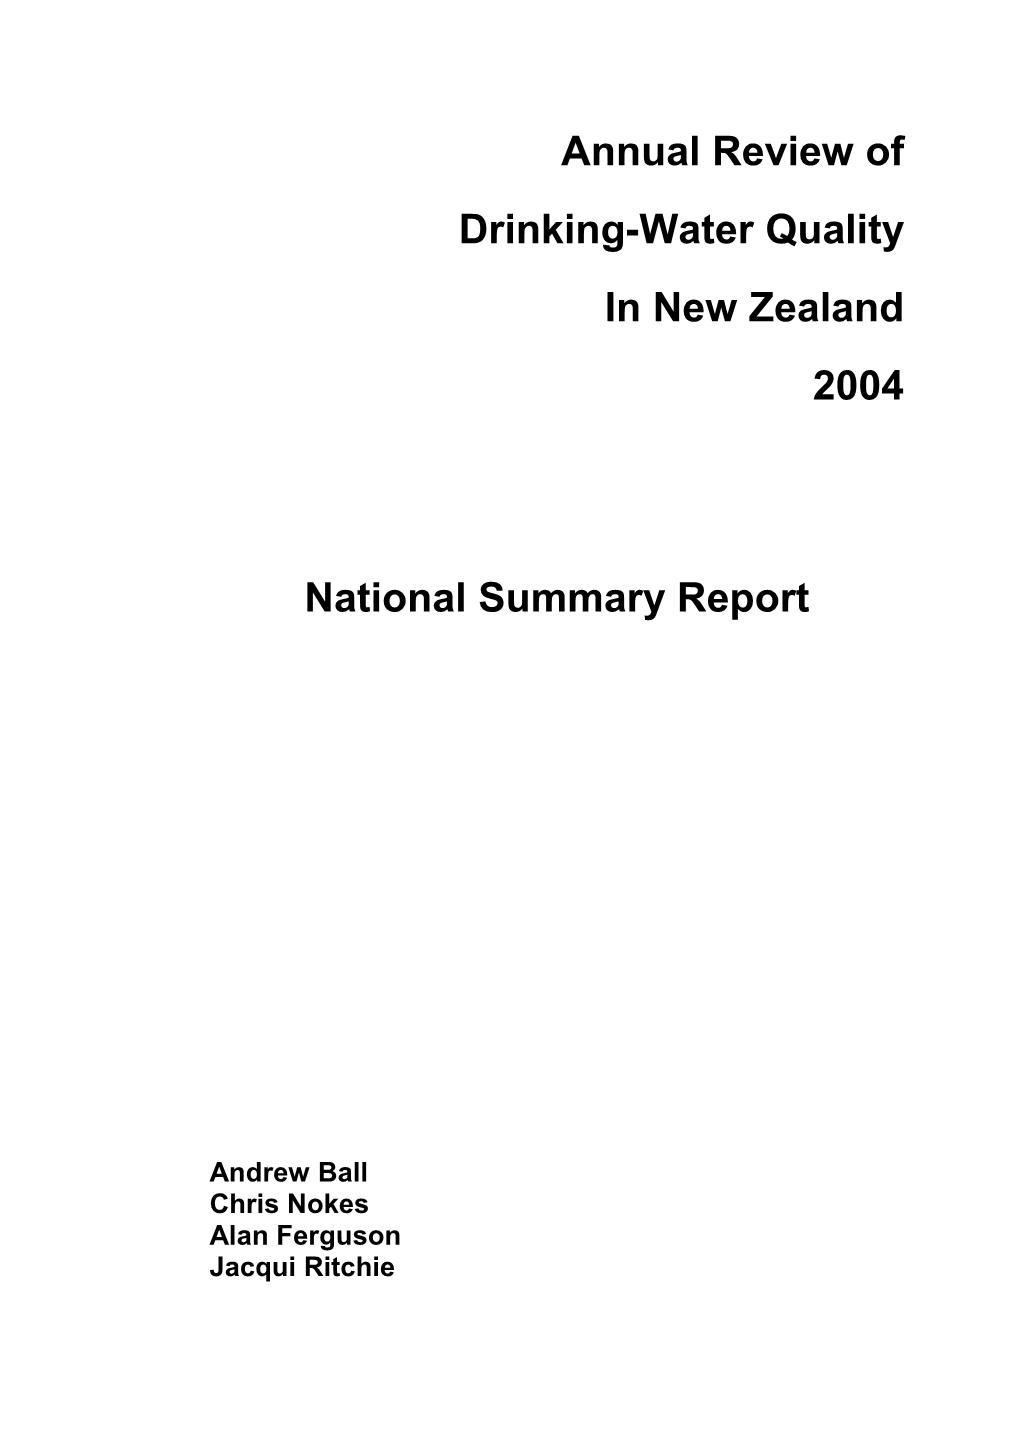 Annual Review of Drinking-Water Quality in New Zealand 2004